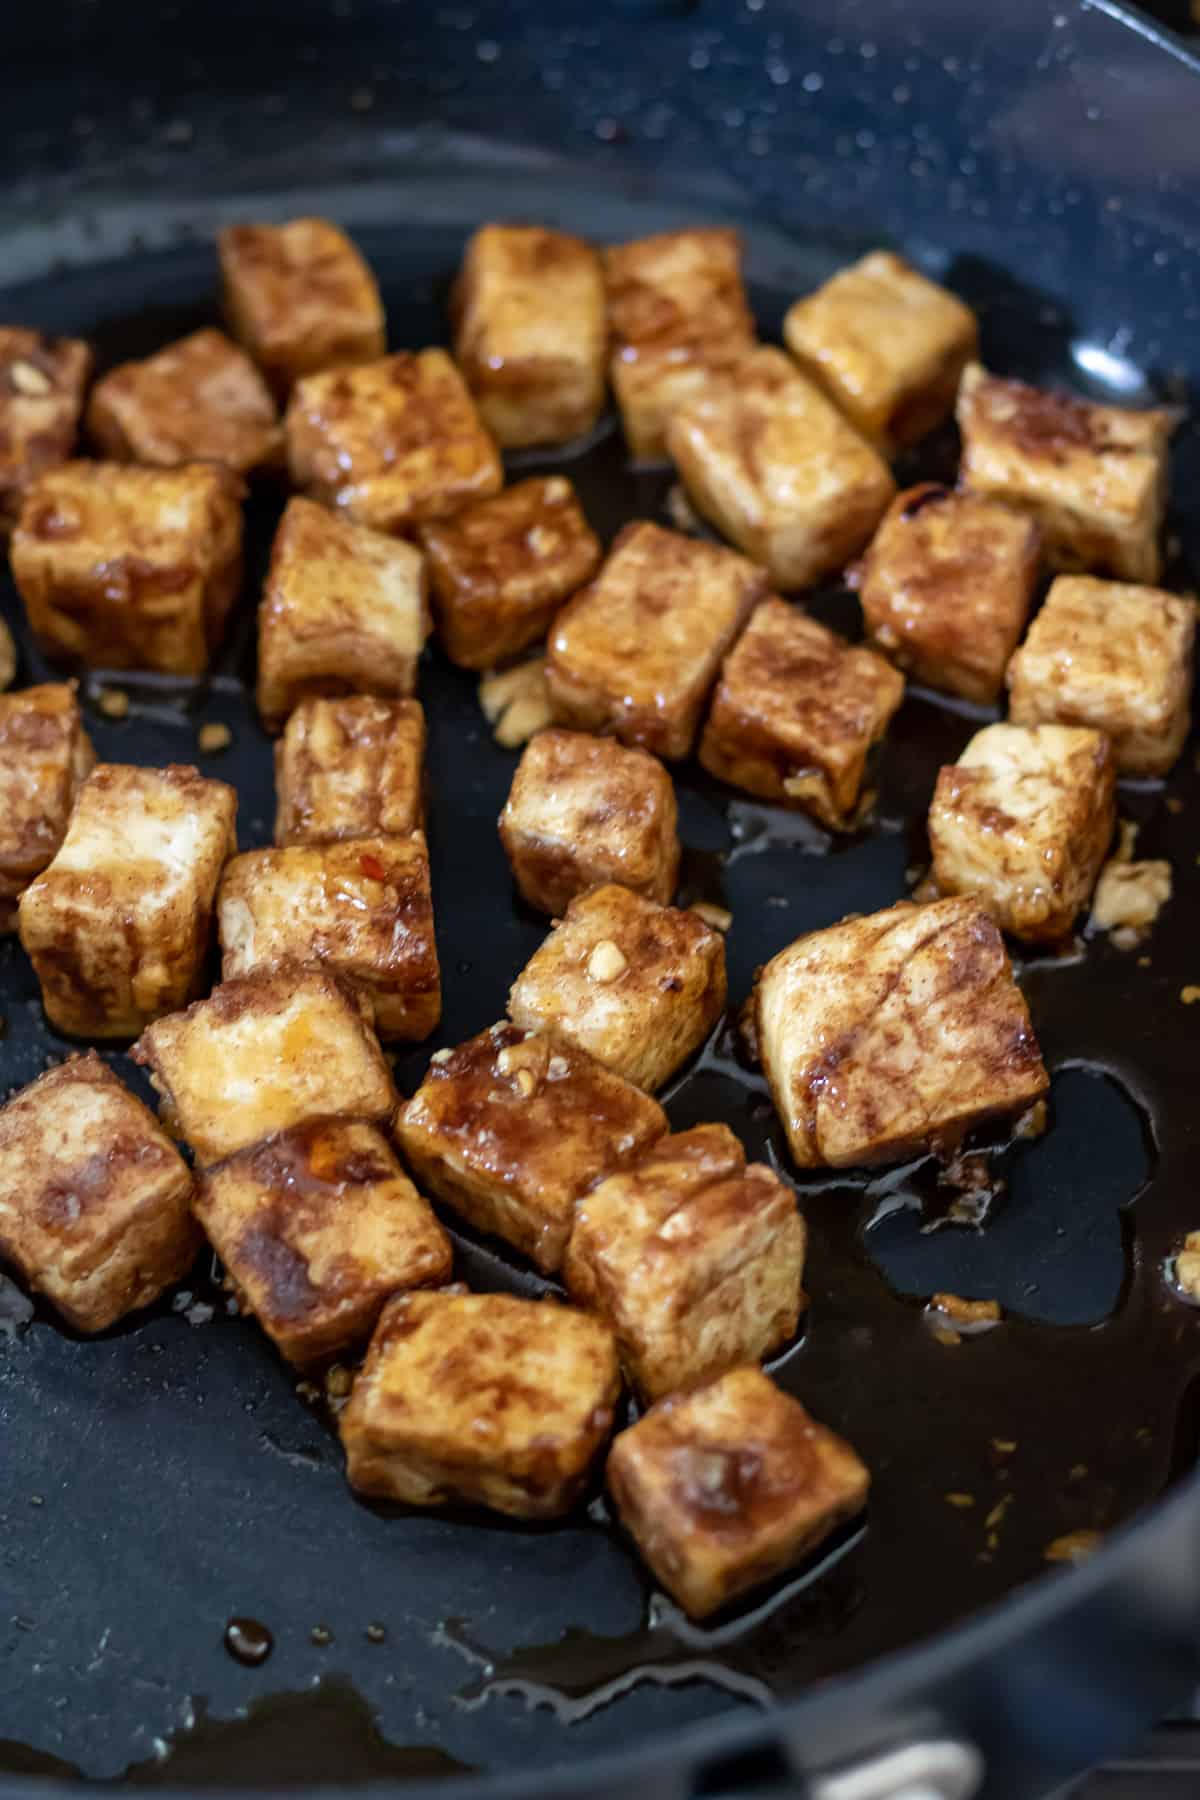 Tossing fried tofu in sticky sauce.